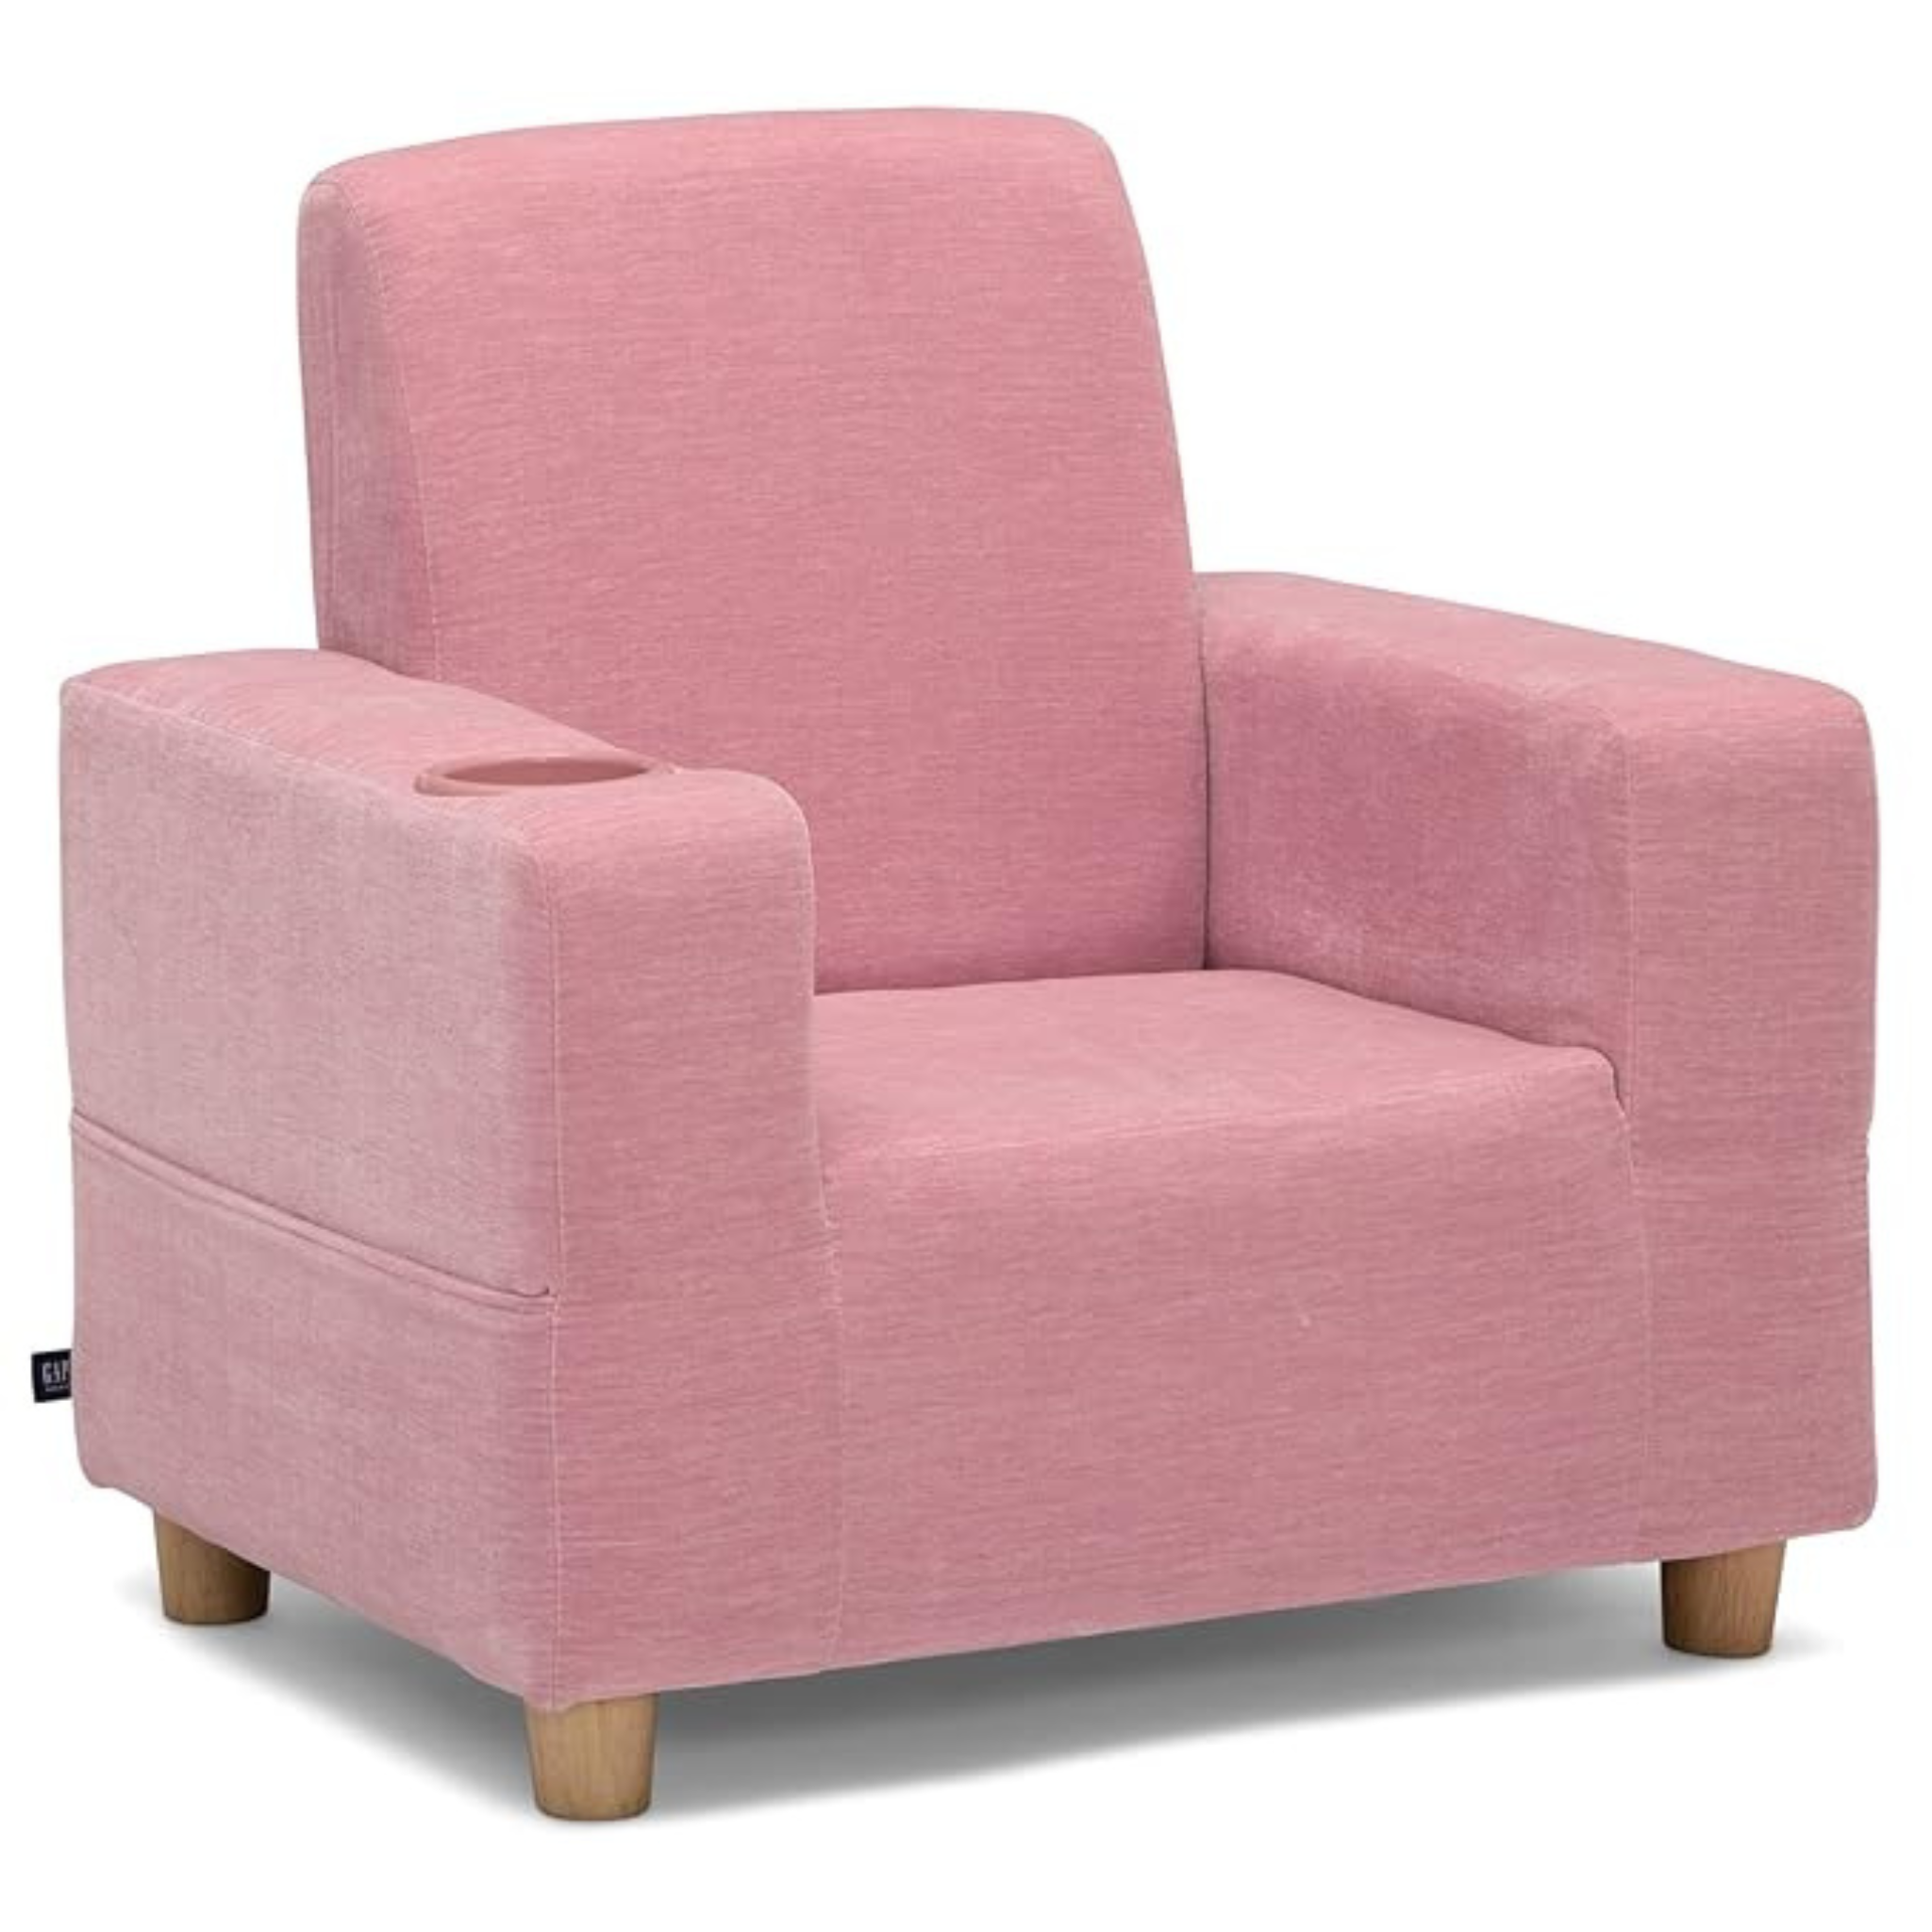 GapKids Upholstered Chair